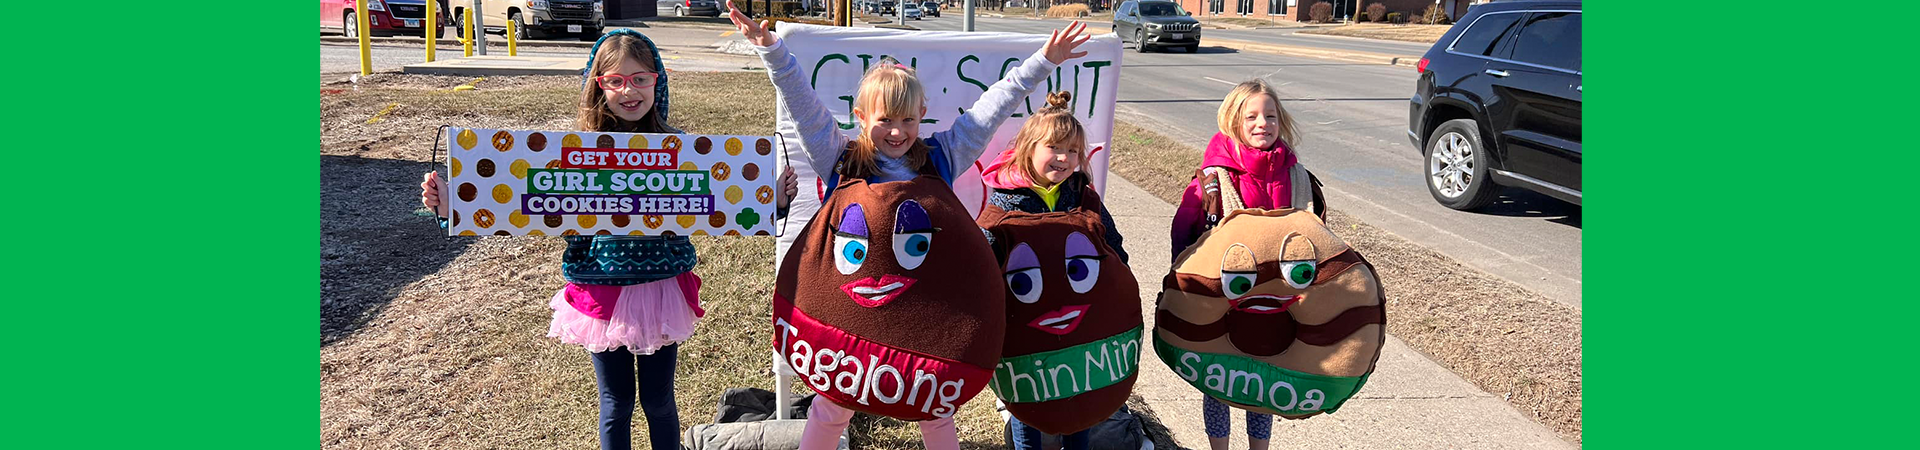  girl scouts selling girl scout cookies at a drive through cookie booth 